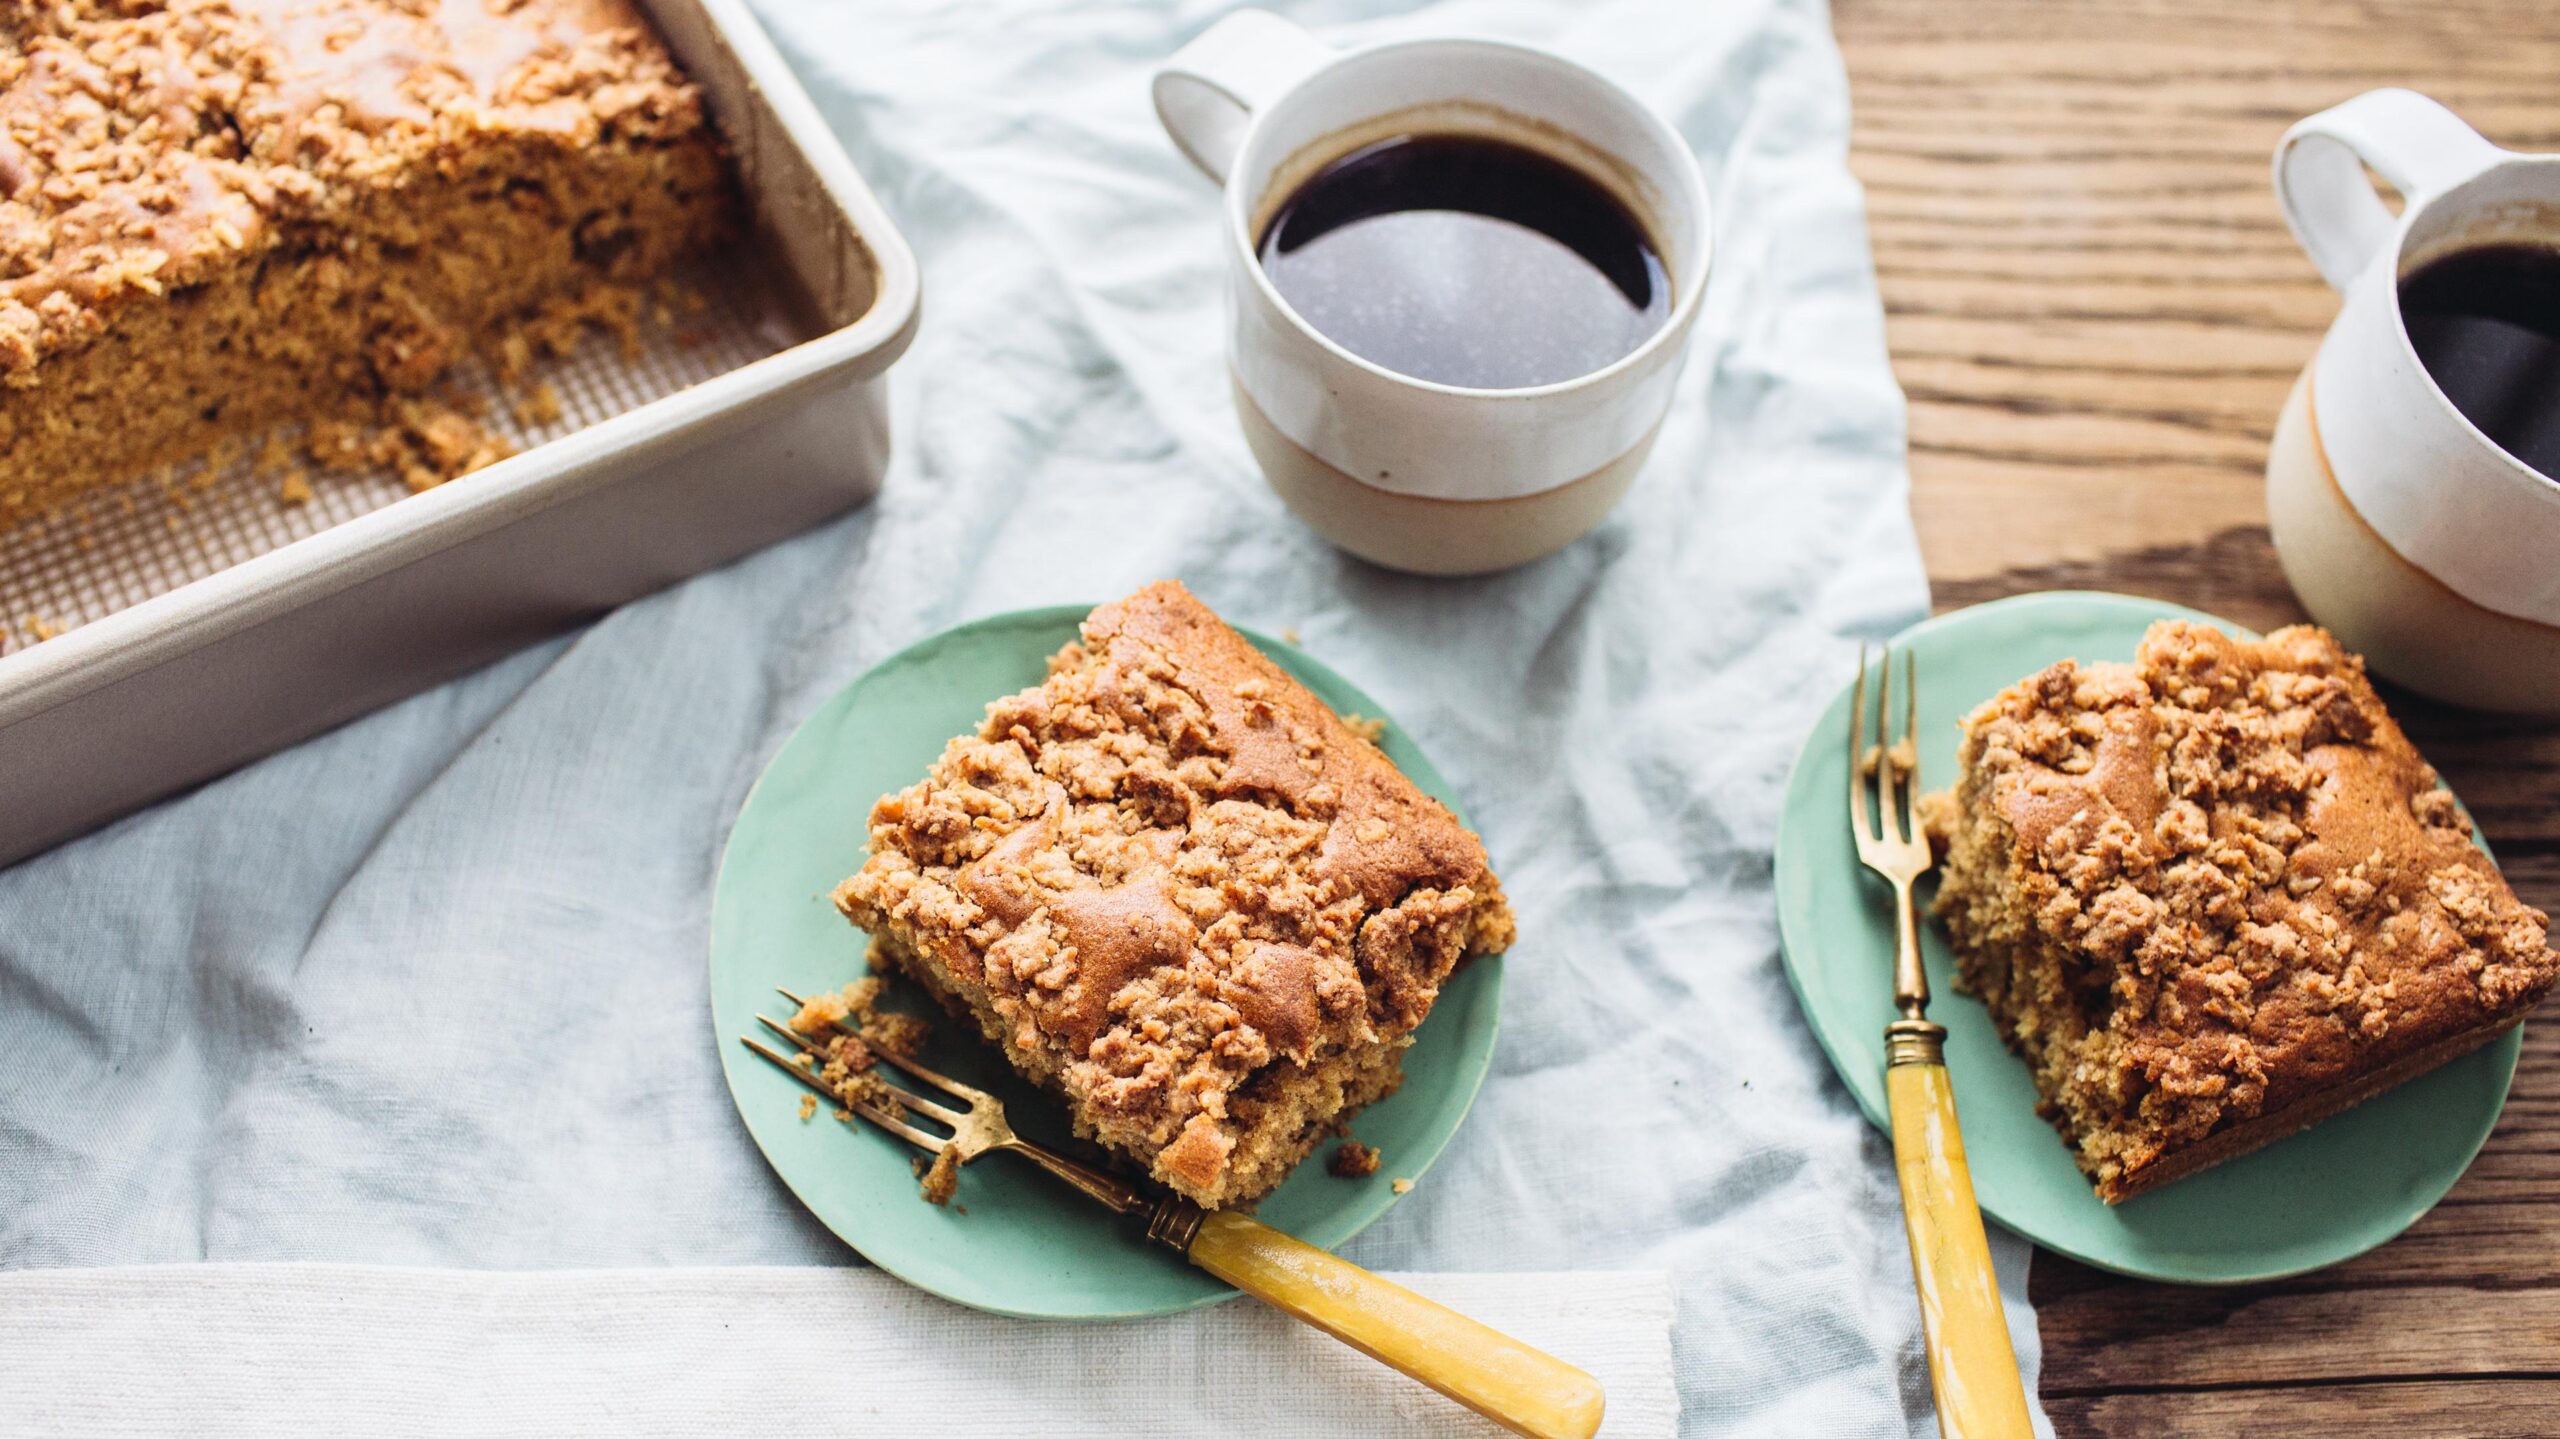 Delight in the Tropical Flavors of this Coconut Coffee Cake